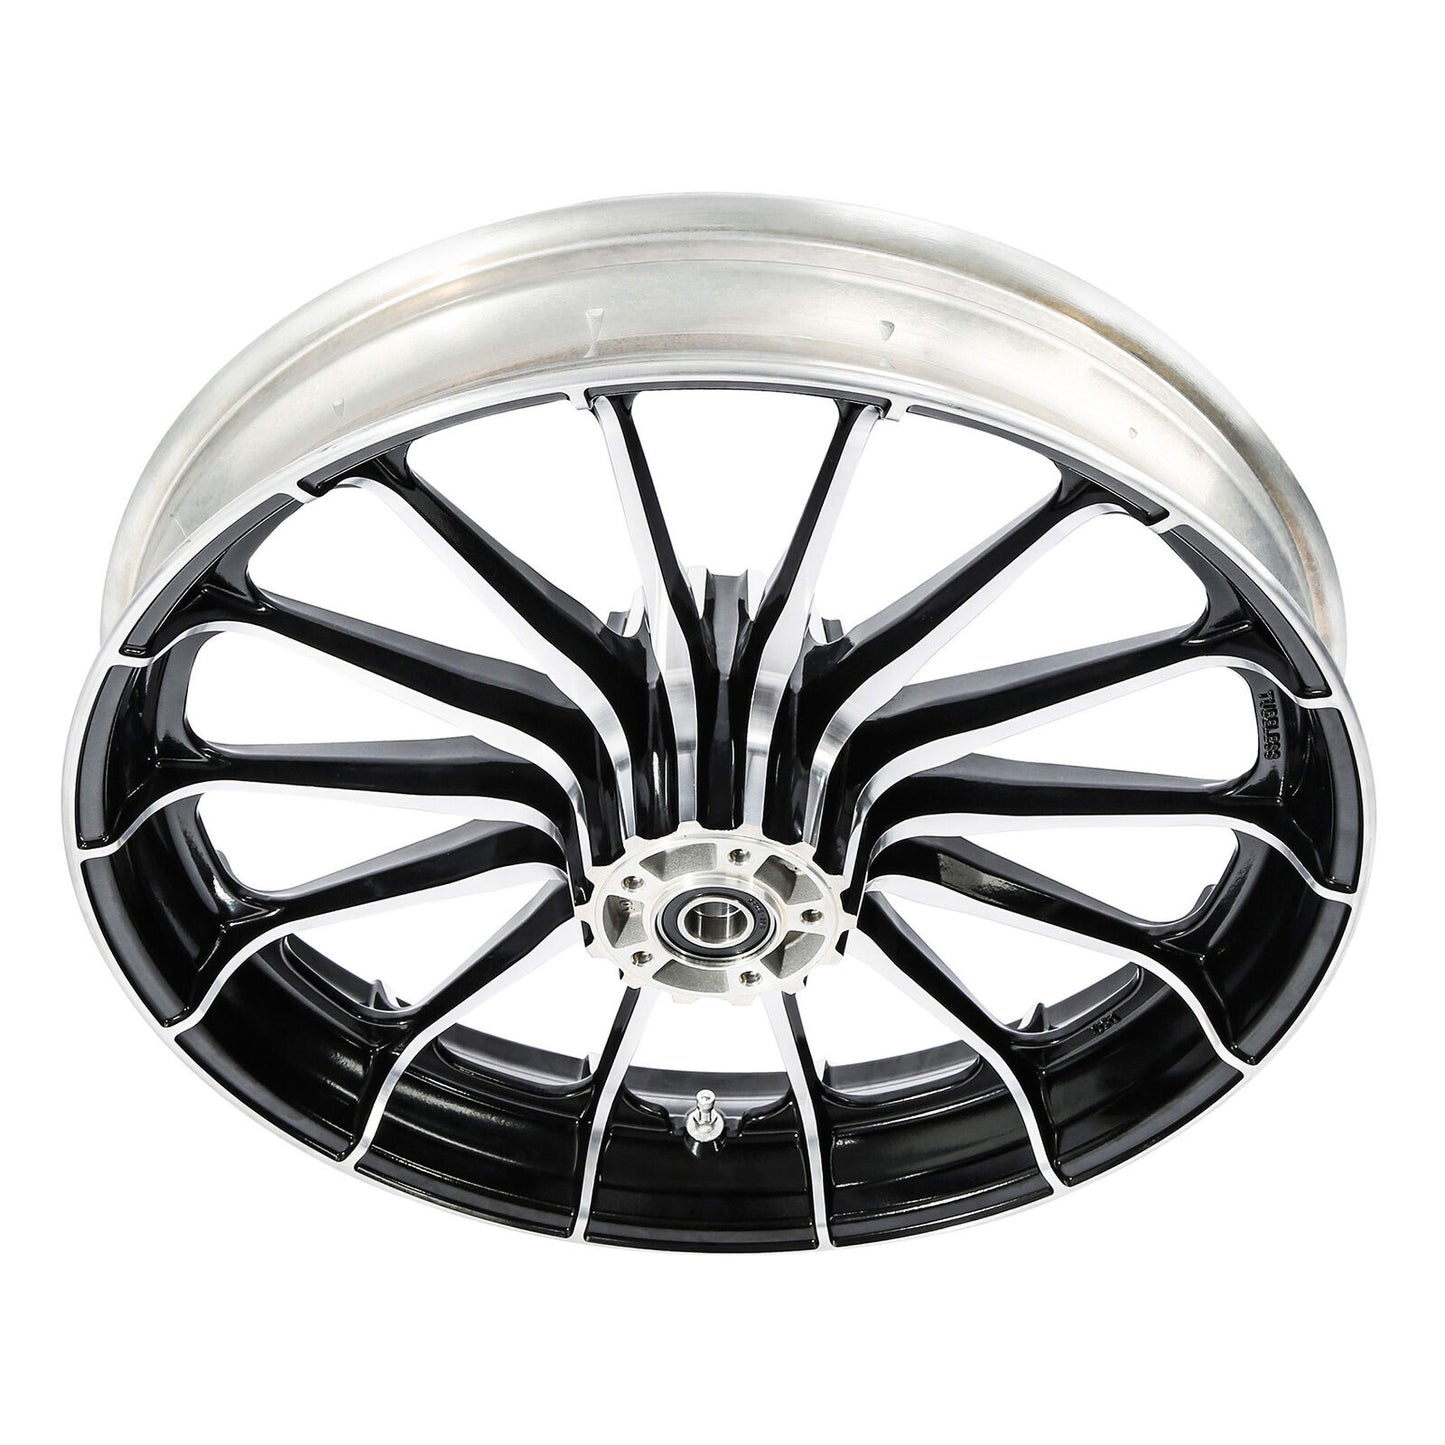 Voodoo Cycle House Custom 21" X 3.5" Front Wheel For Harley-Davidson Touring ABS Models Street Road Electra Glide 2008-UP